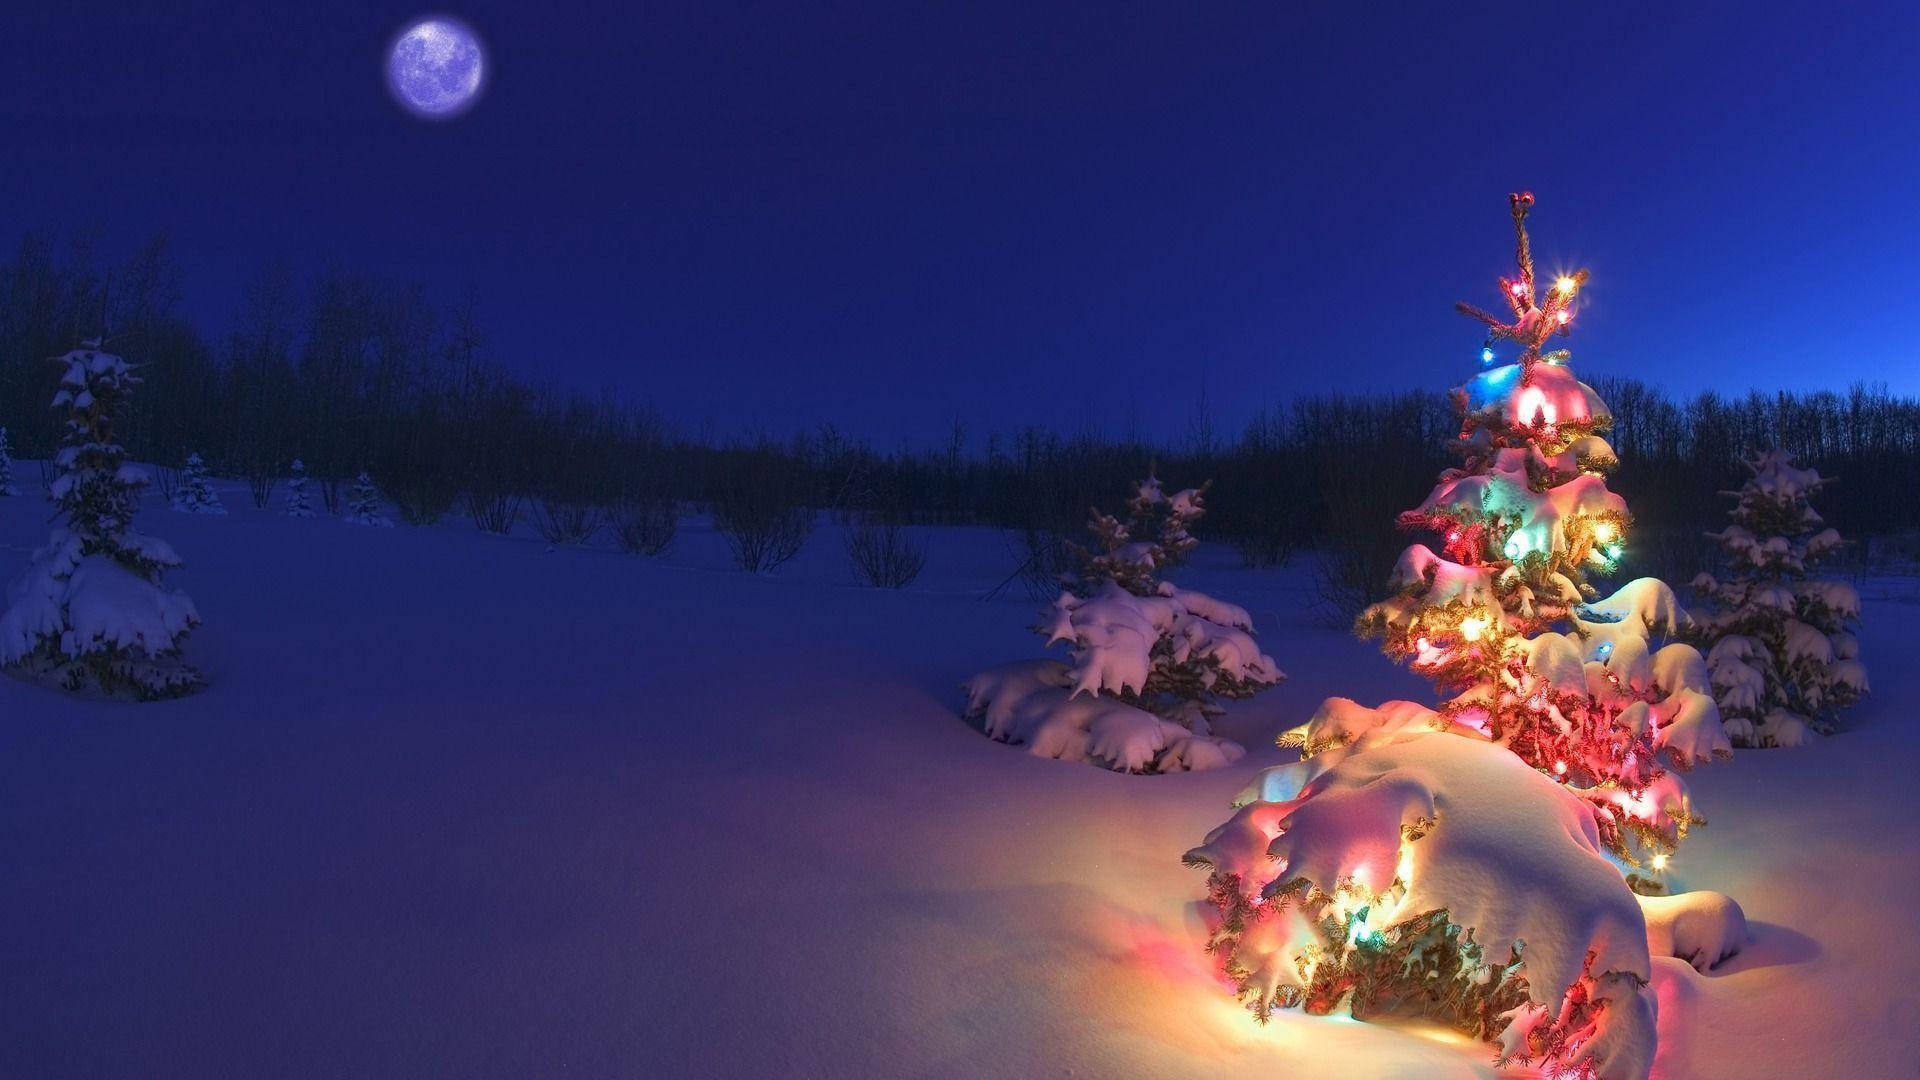 Full Moon Above The Christmas Forest Wallpaper